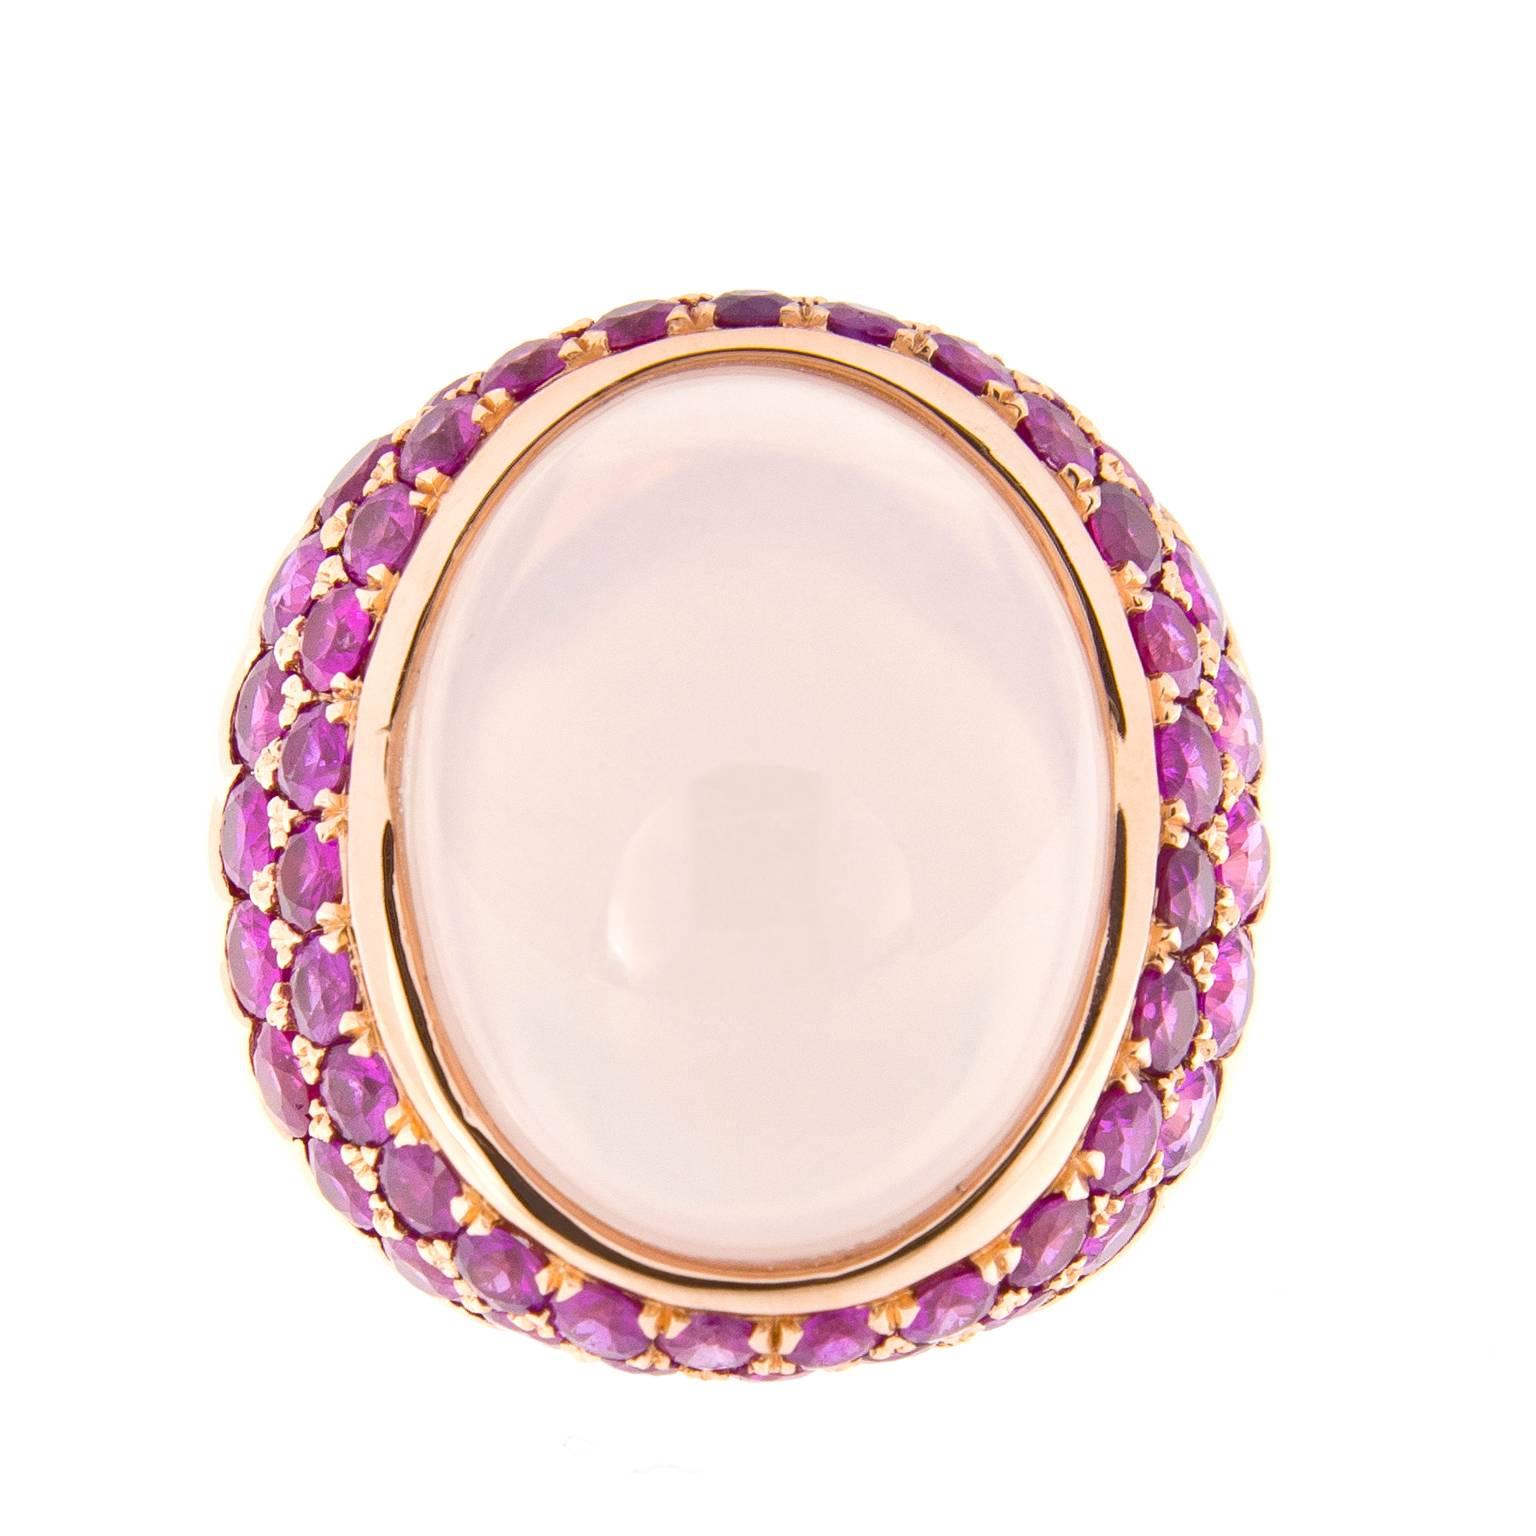 Pretty in pink! The beautiful oval cabochon rose quartz is 19mm x 16mm and is surrounded by two rows of stunning pink sapphires. Ring crafted in 18k rose gold. Ring Size 6. Weighs 17.8 grams.
Handmade in New York

Pink Sapphires 4.0 cttw